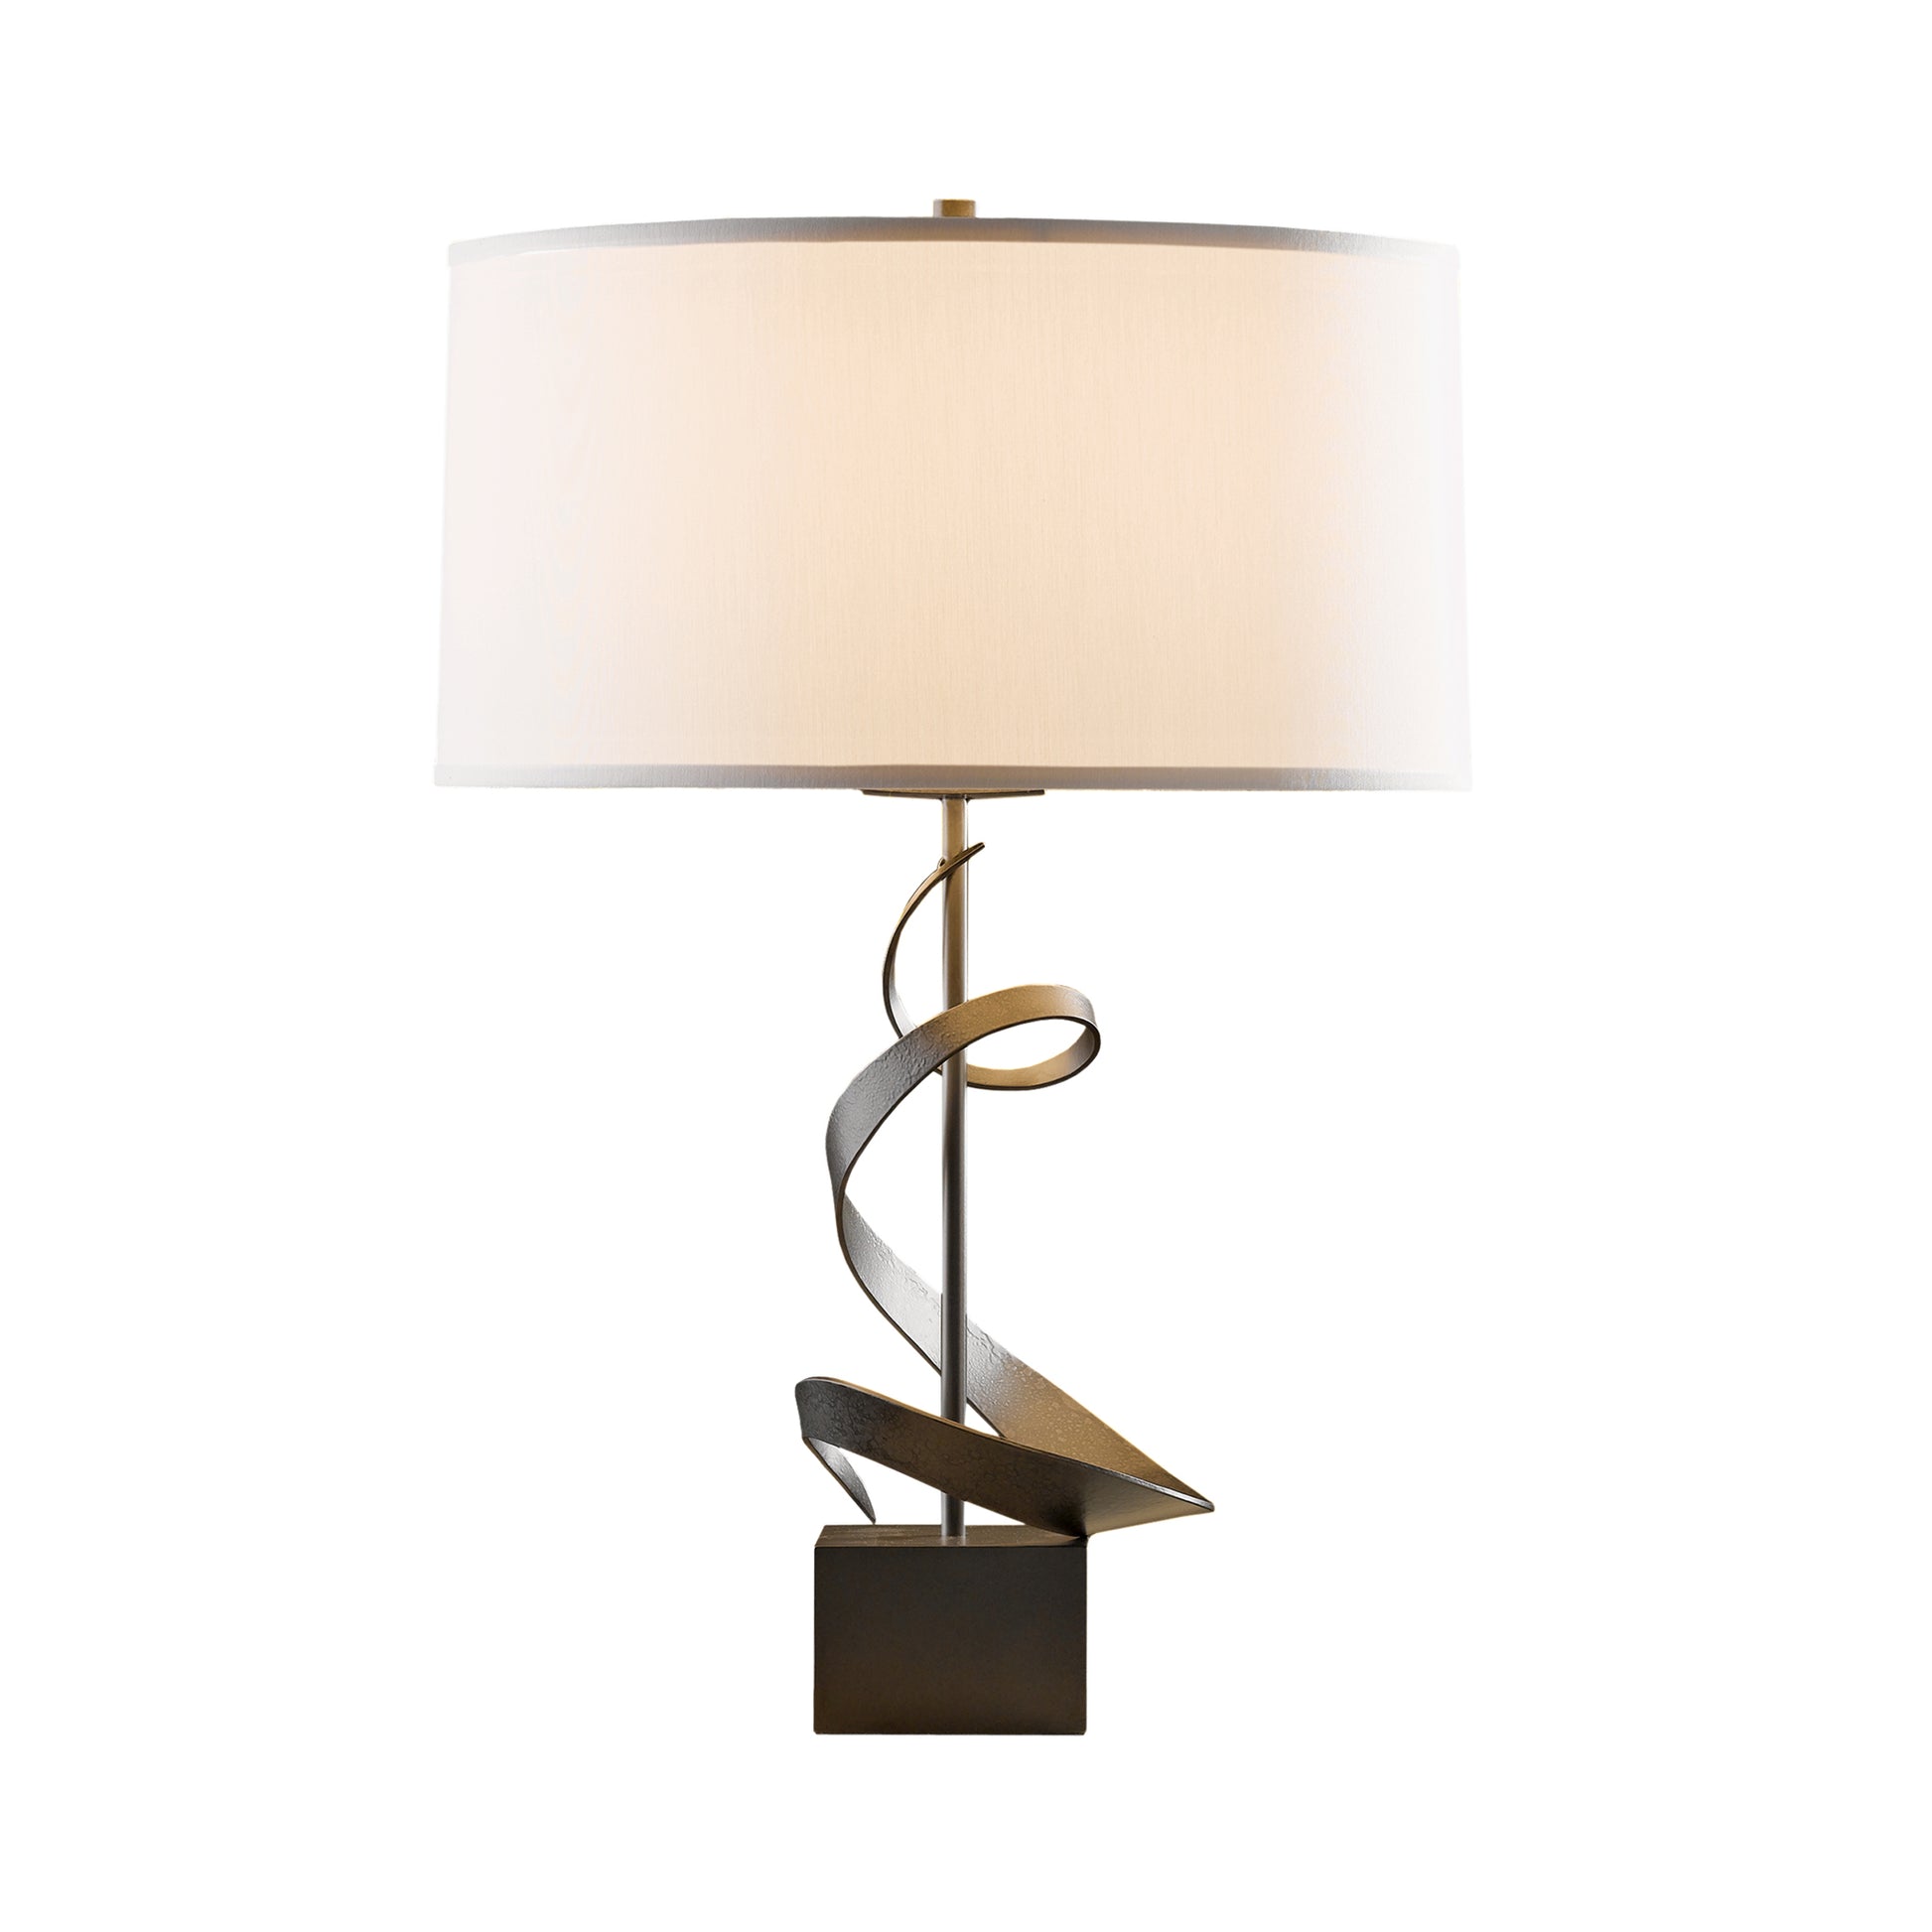 A modern Hubbardton Forge Spiral Table Lamp with a hand-forged iron base and a large, cylindrical cream shade, isolated on a white background.